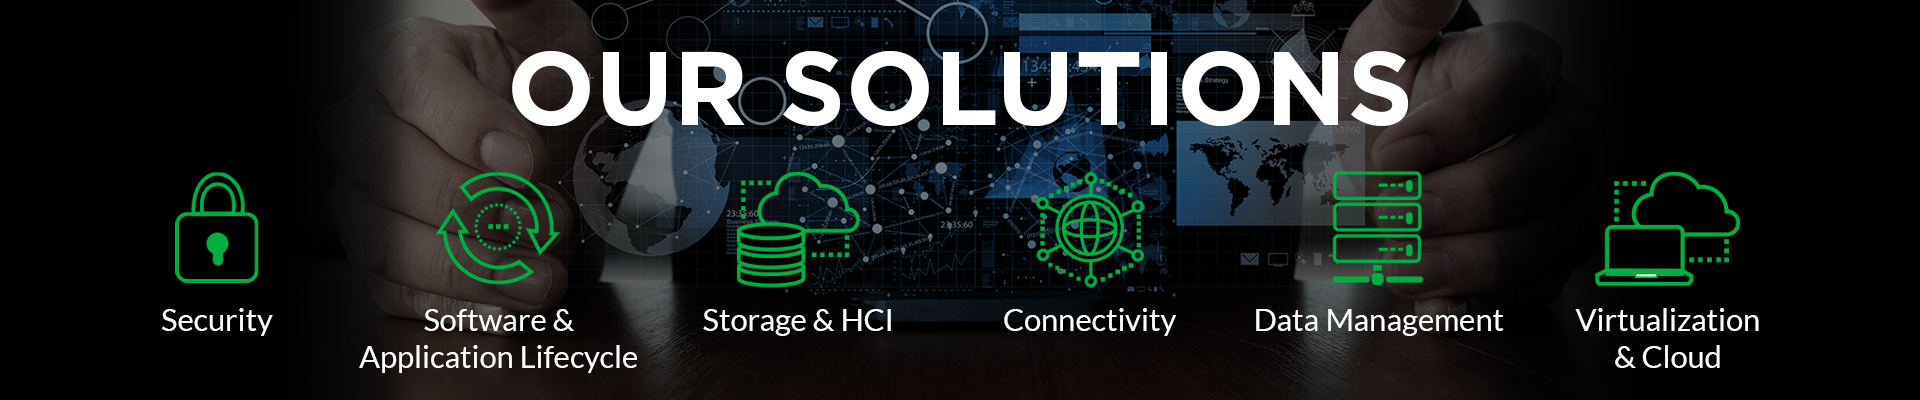 Our Solutions